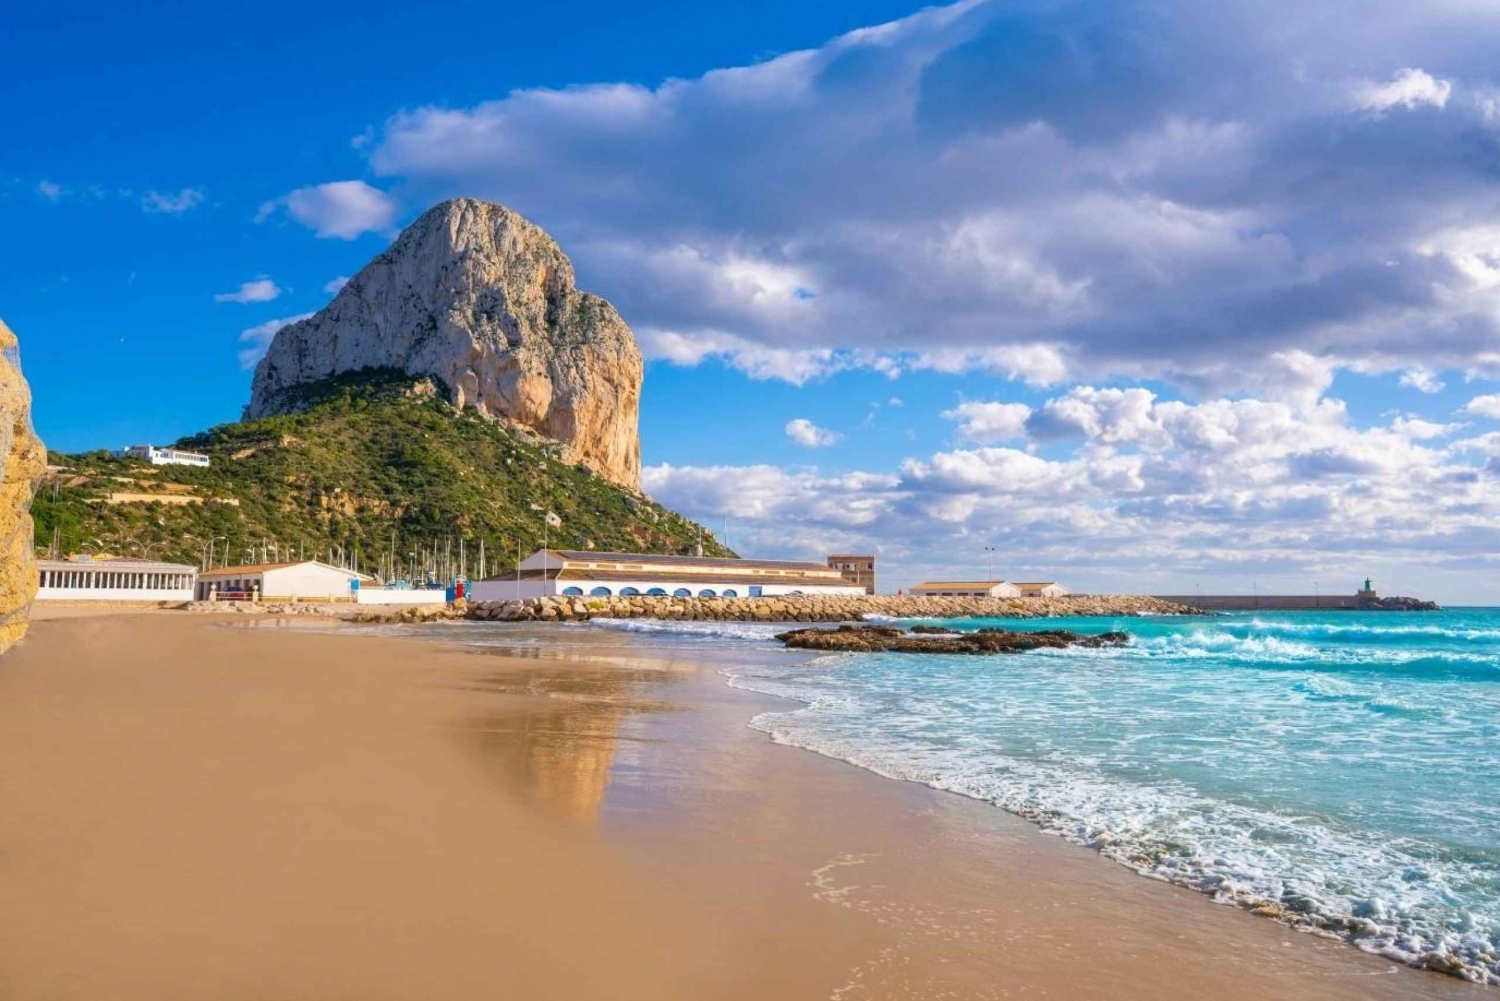 From Valencia: Day trip to Calpe and Benidorm